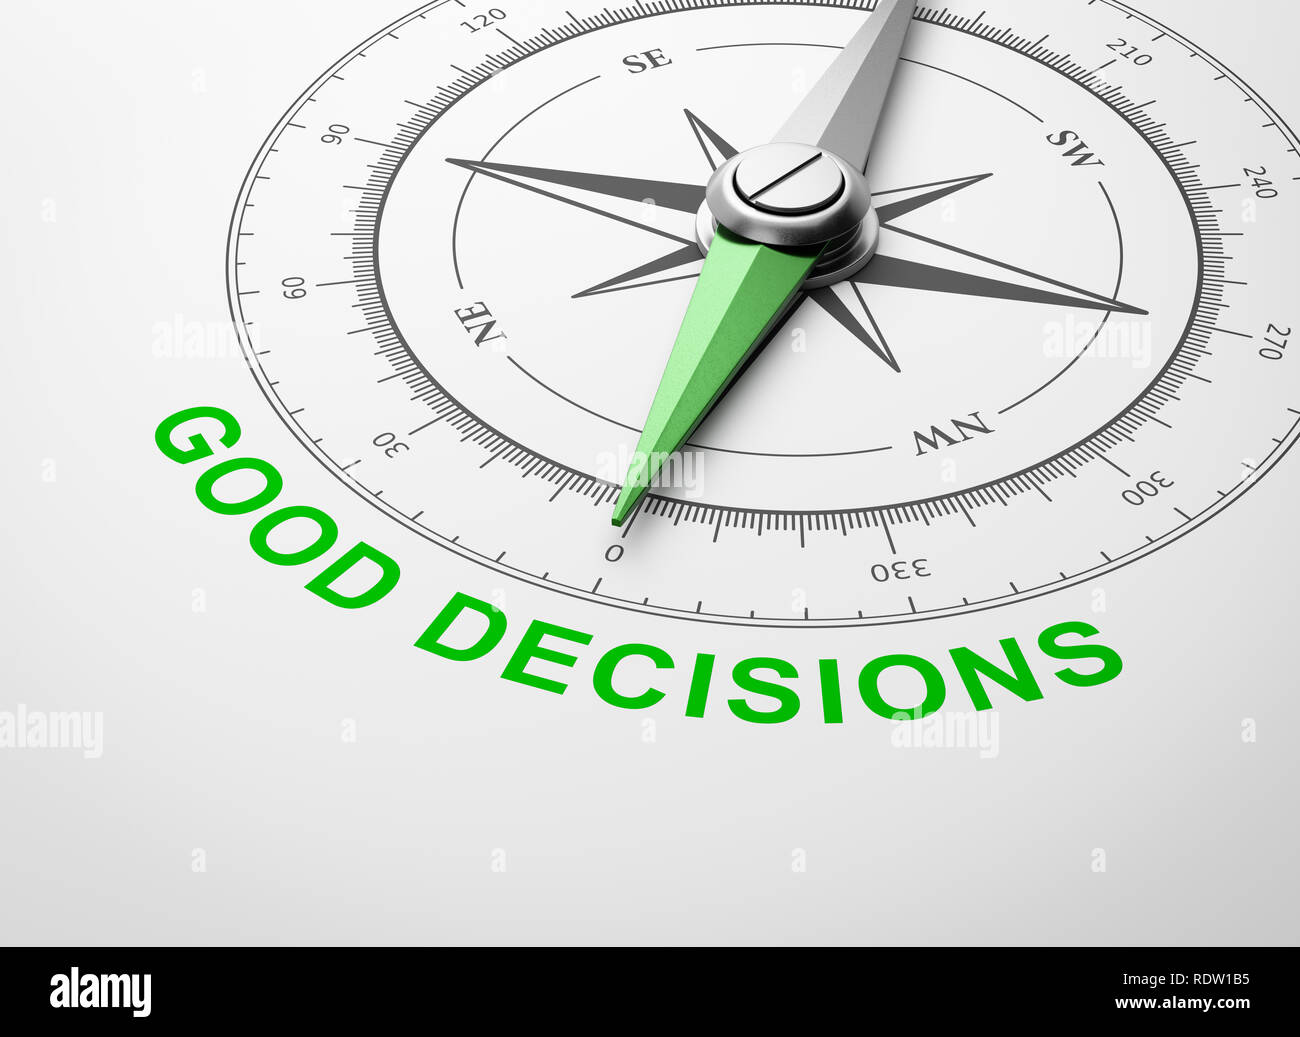 Magnetic Compass with Needle Pointing Green Good Decisions Text on White Background 3D Illustration Stock Photo